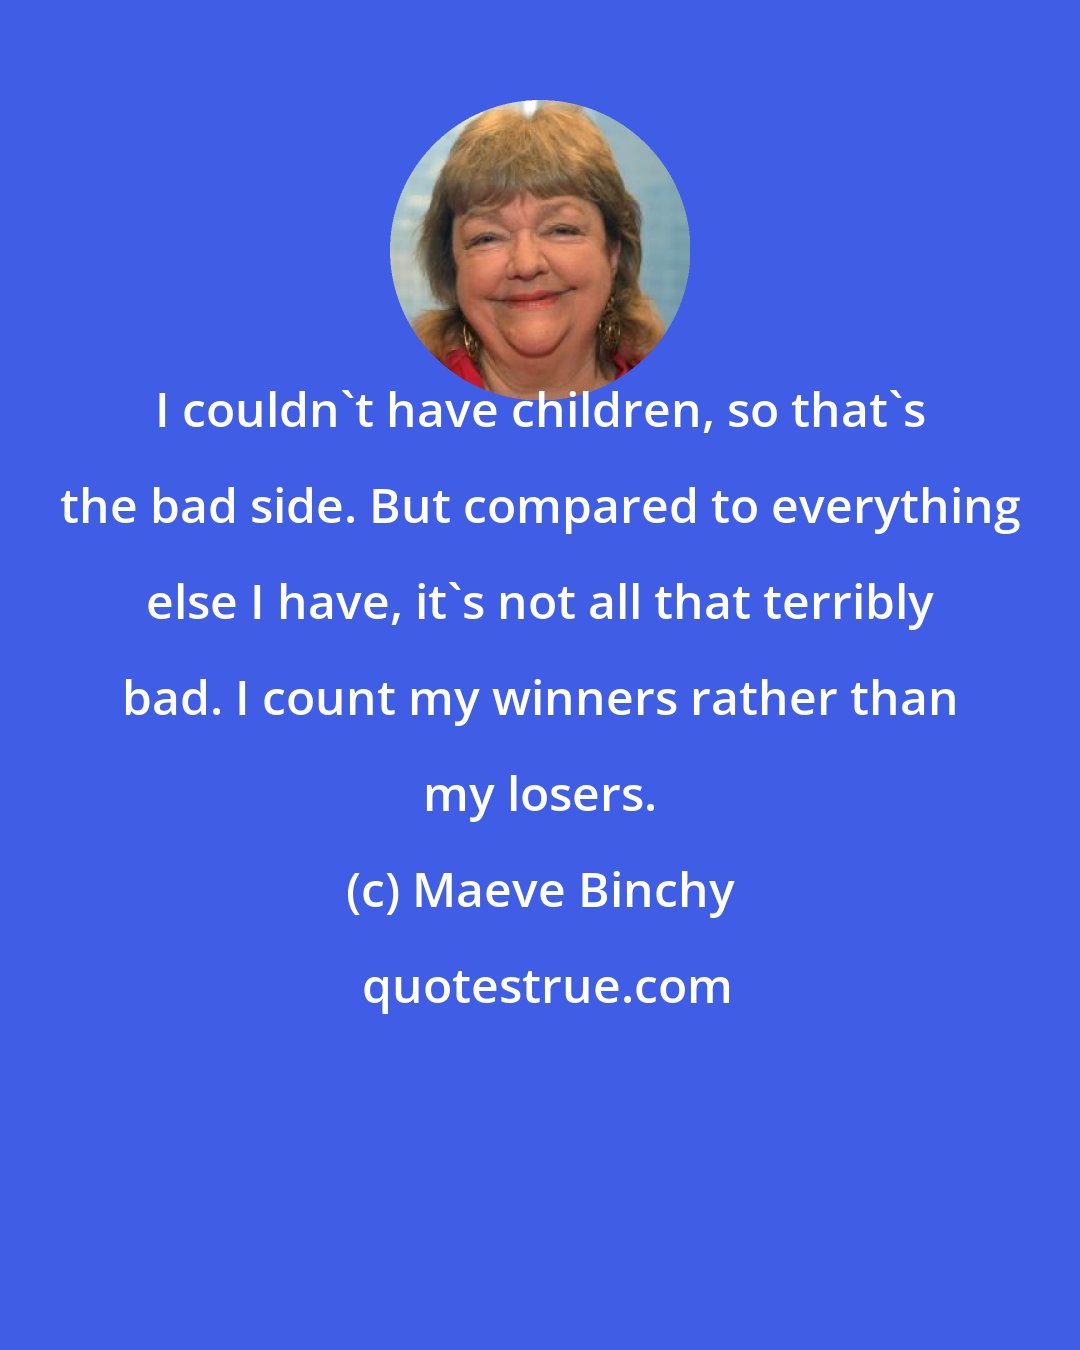 Maeve Binchy: I couldn't have children, so that's the bad side. But compared to everything else I have, it's not all that terribly bad. I count my winners rather than my losers.